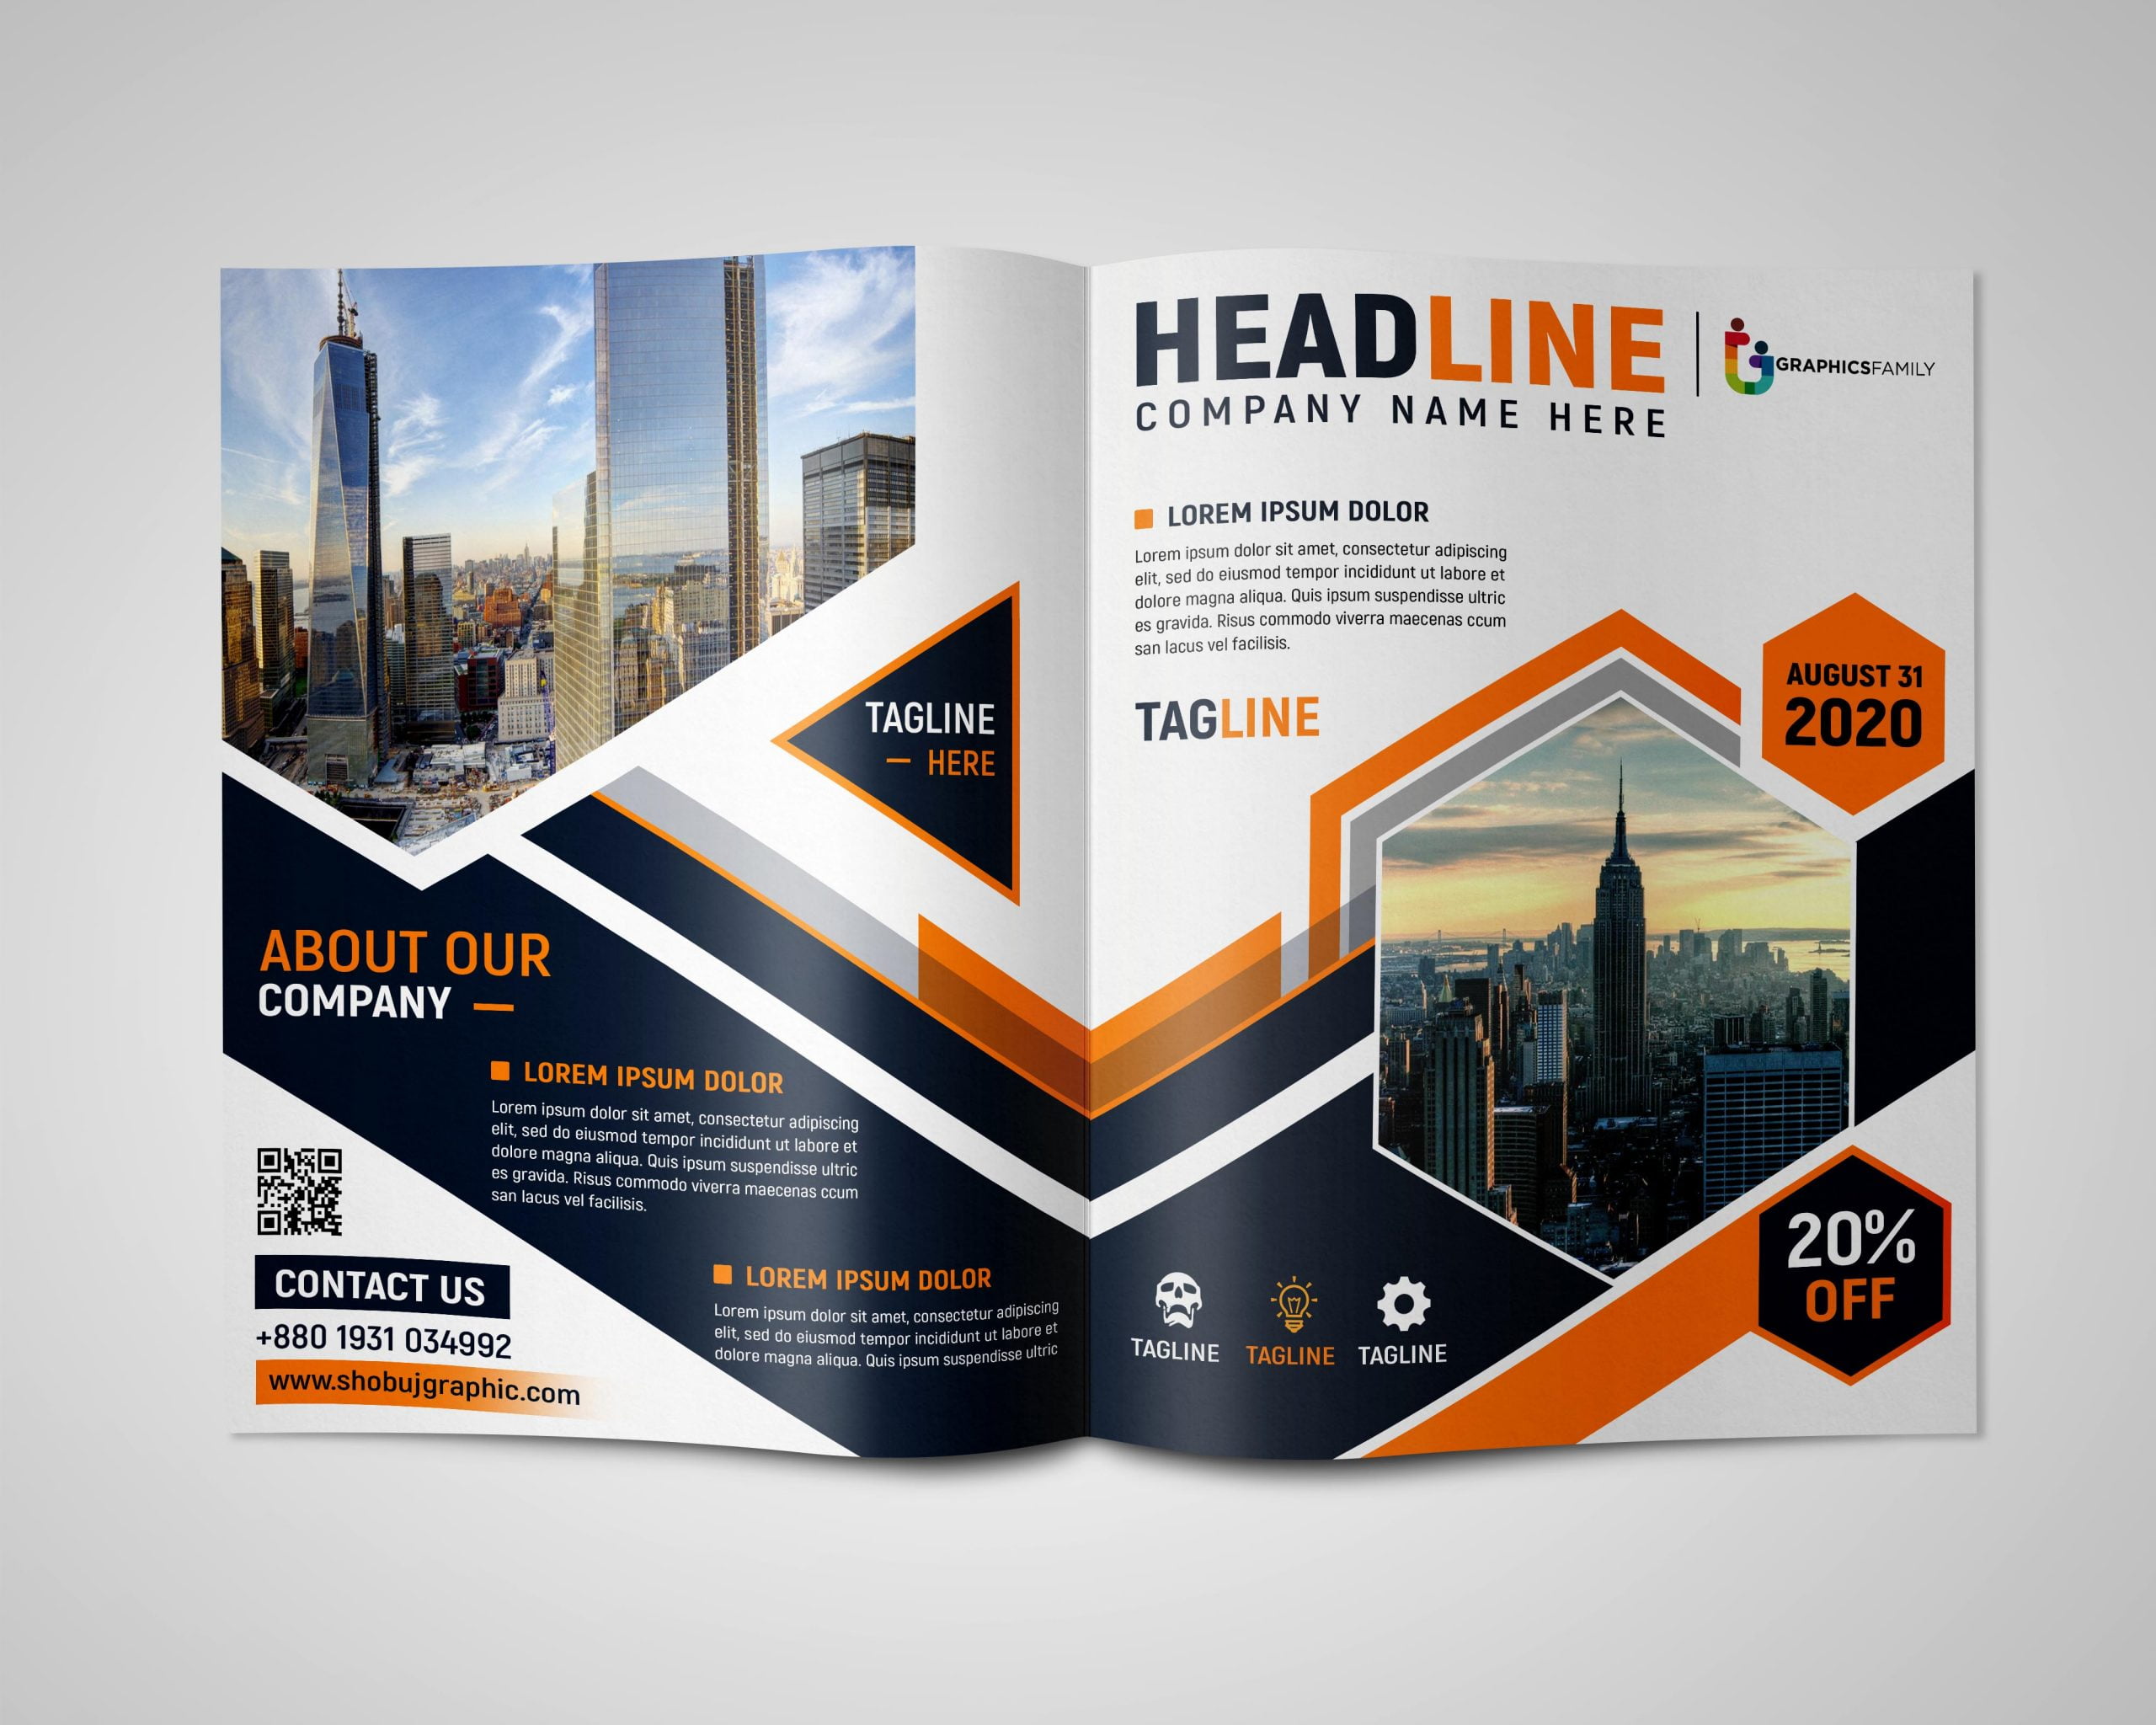 Print Flyers Efficiently And Boost Your Success Rate Now